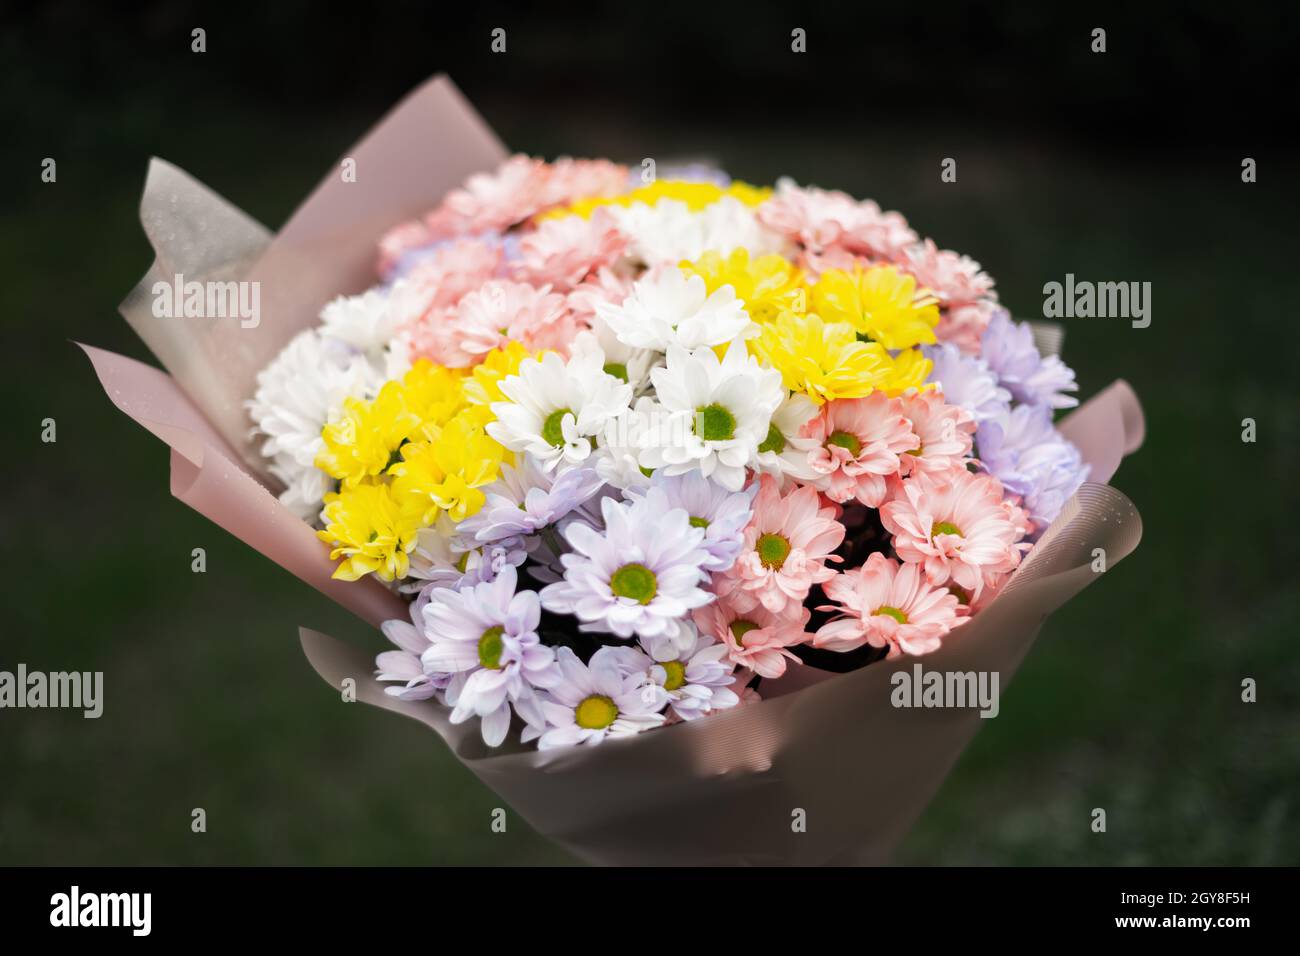 Flowers bouquet made of multicolored delicate pastel colors chrysanthemum flowers. Floral concept Stock Photo